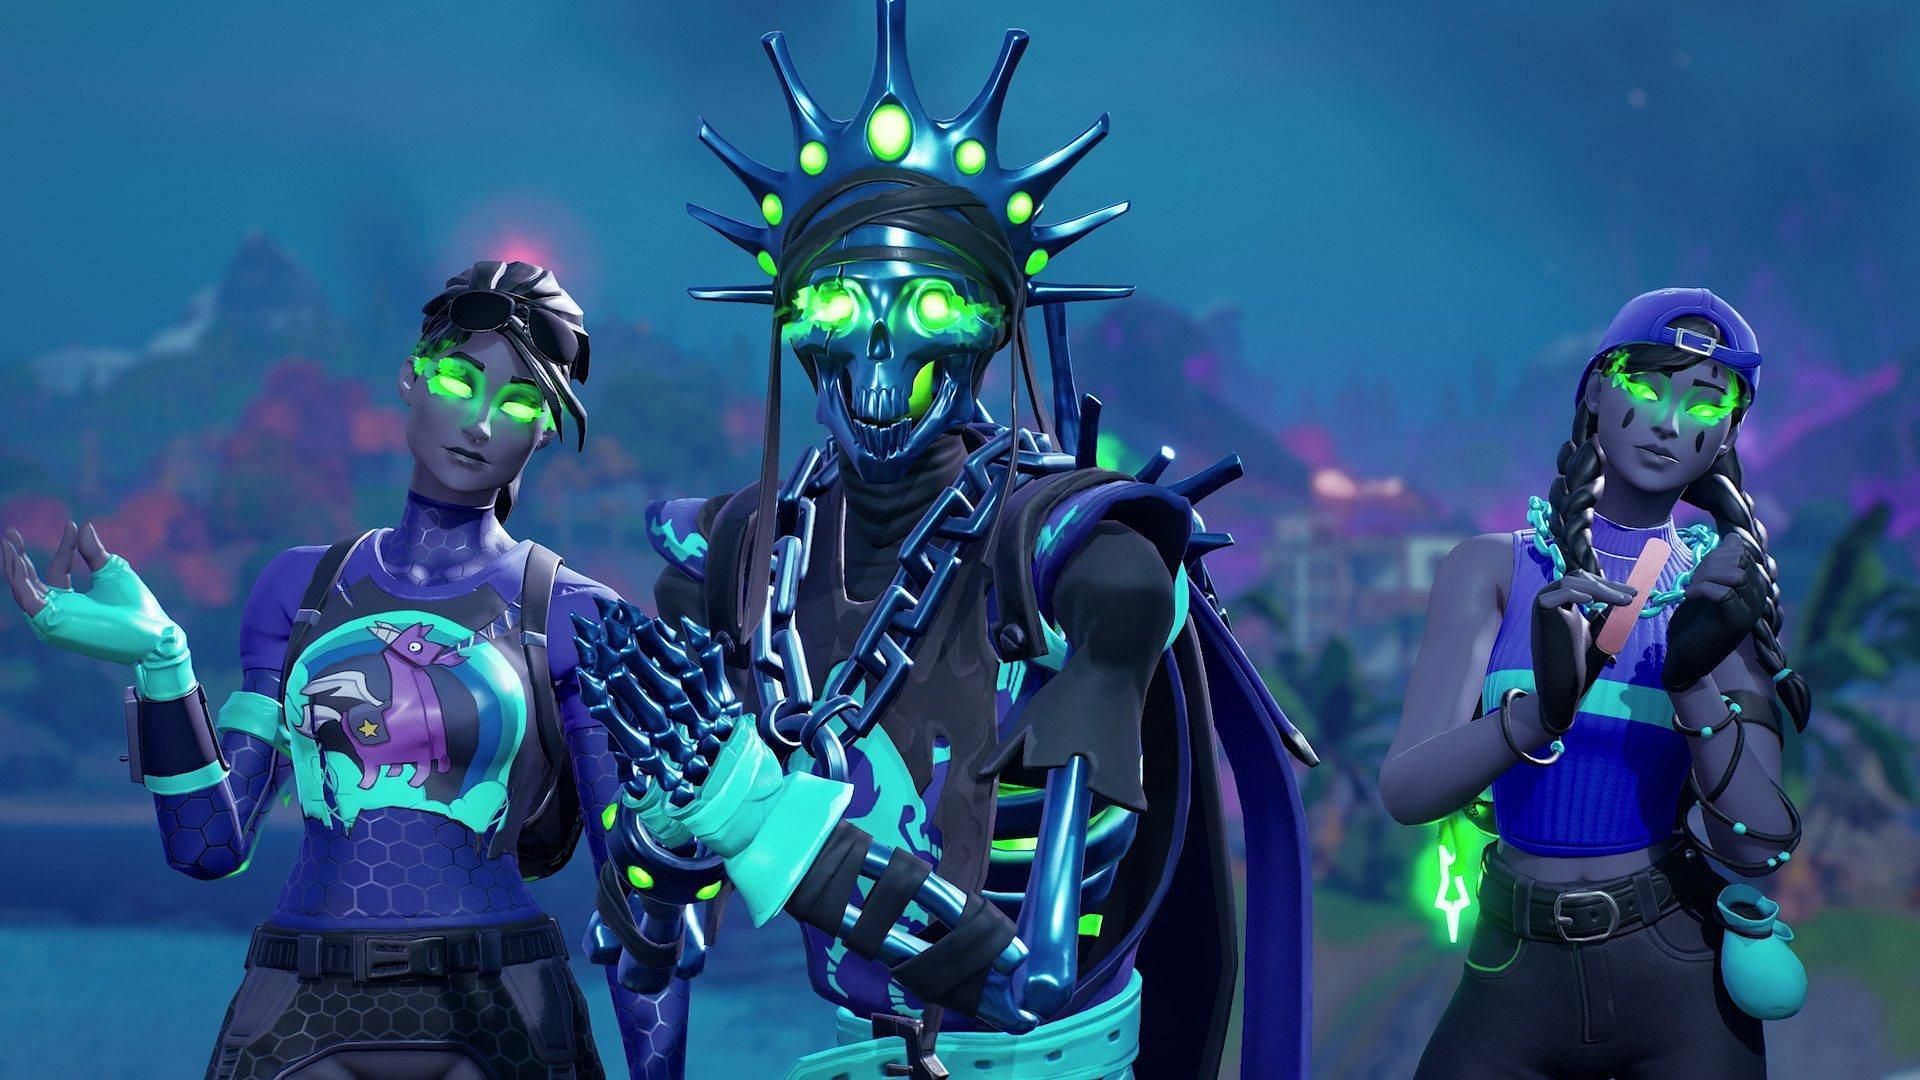 Fortnite Minty Legends pack costs less than $3 on GameStop (Image via Epic Games)